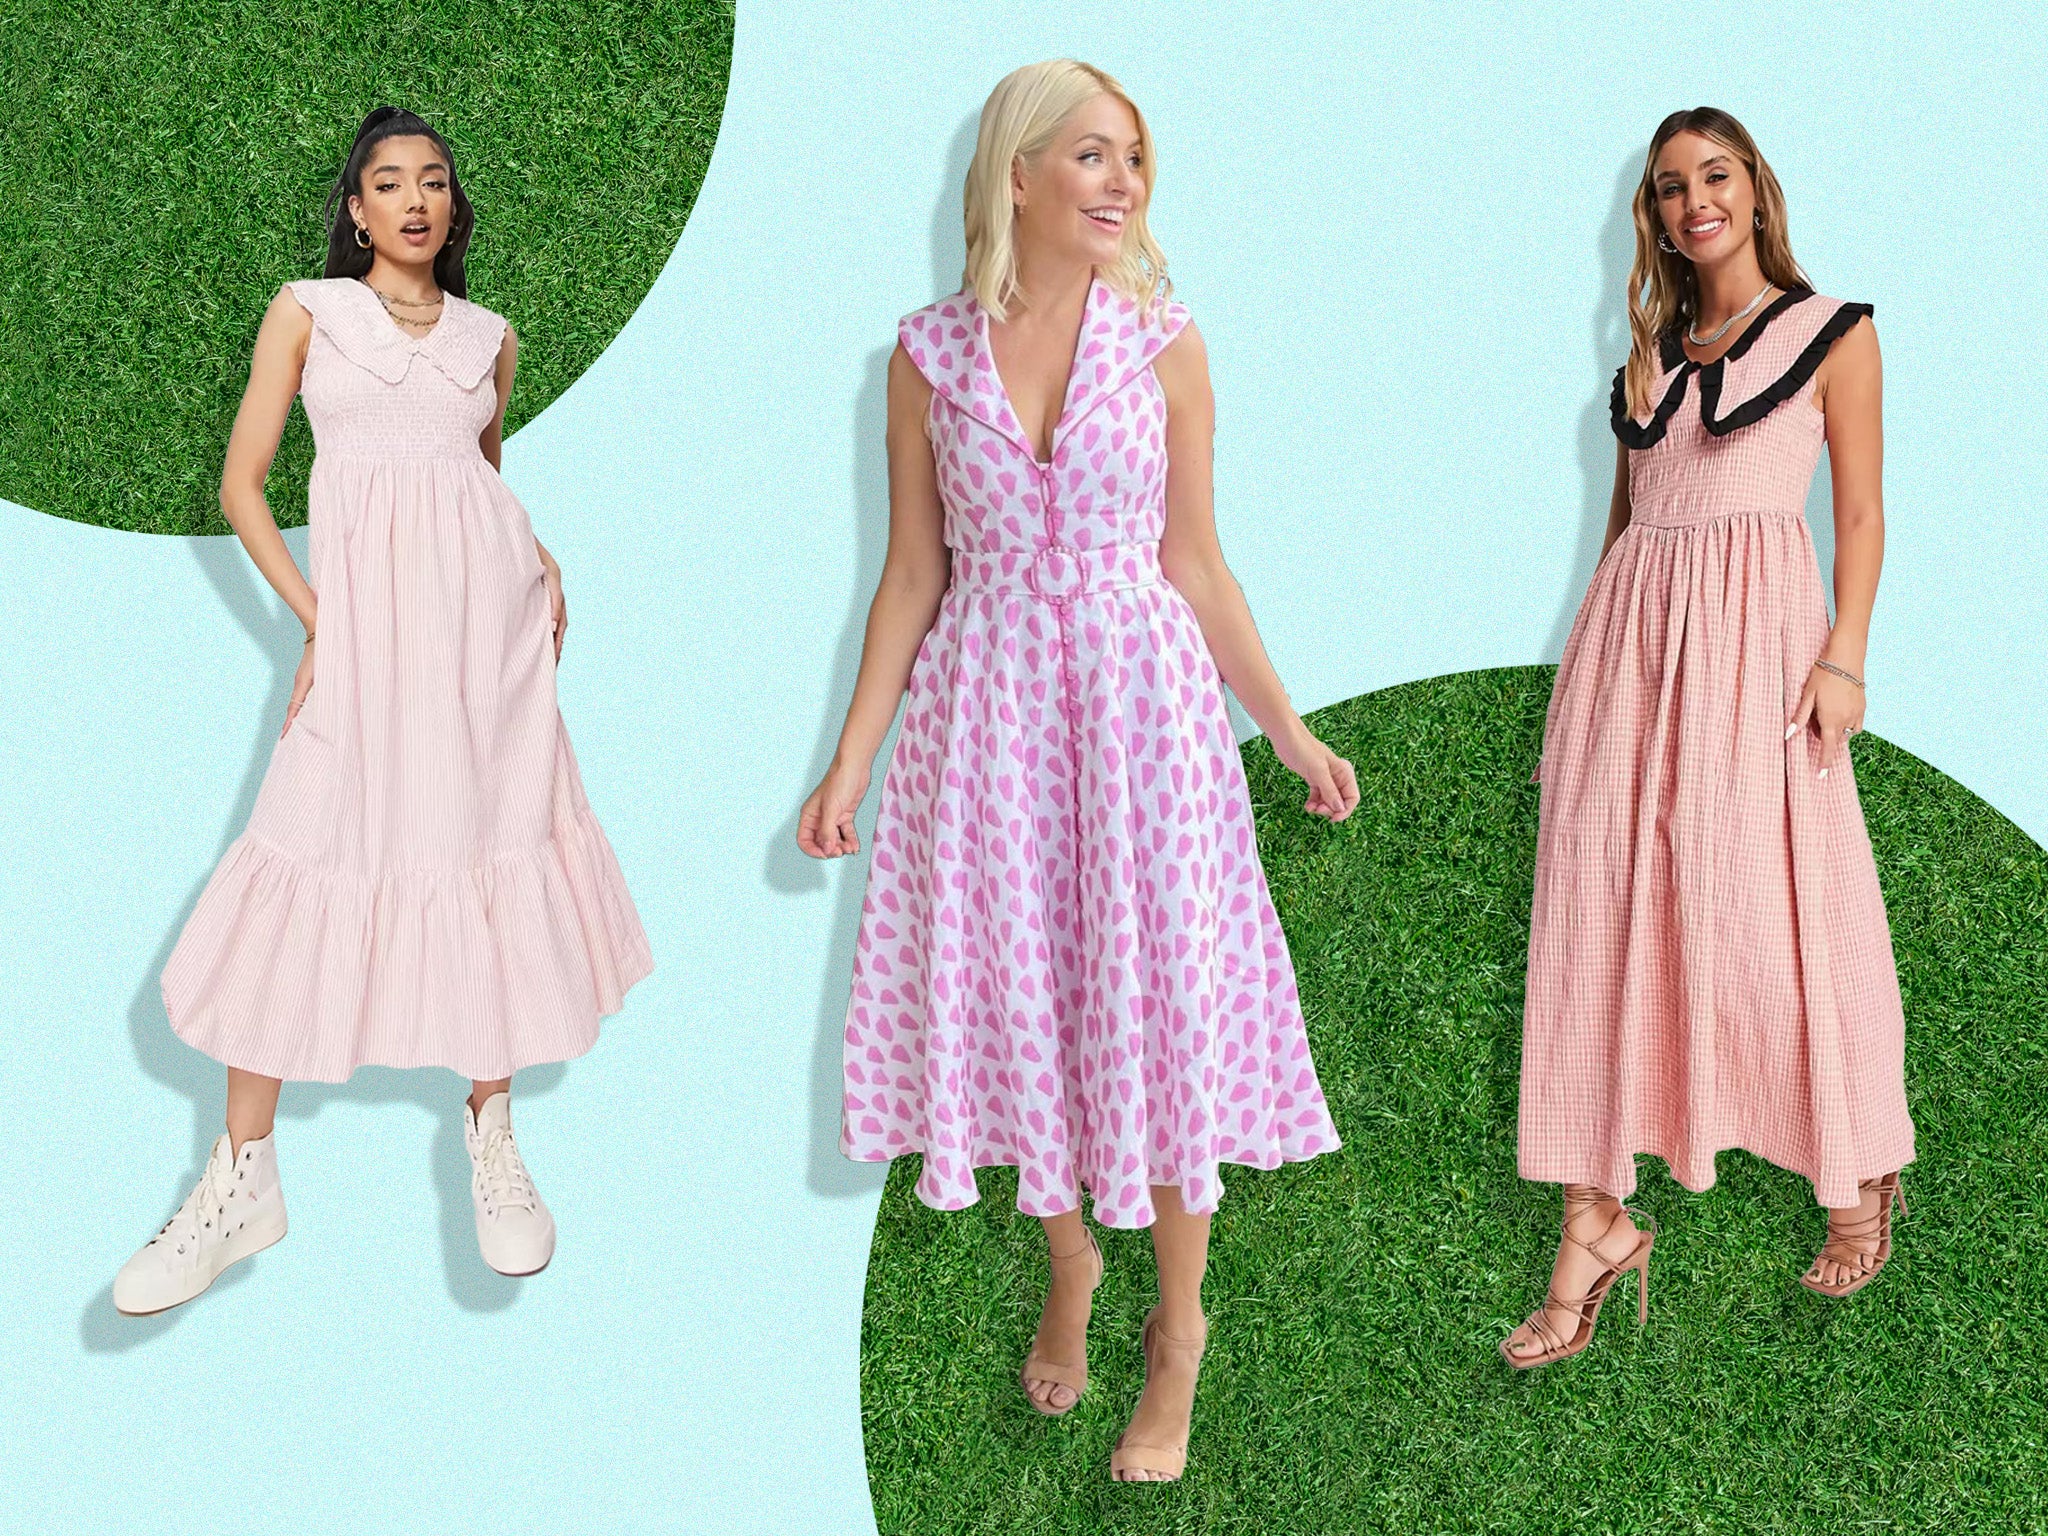 Holly Willoughby’s Wimbledon dress serves vintage style – shop these ...